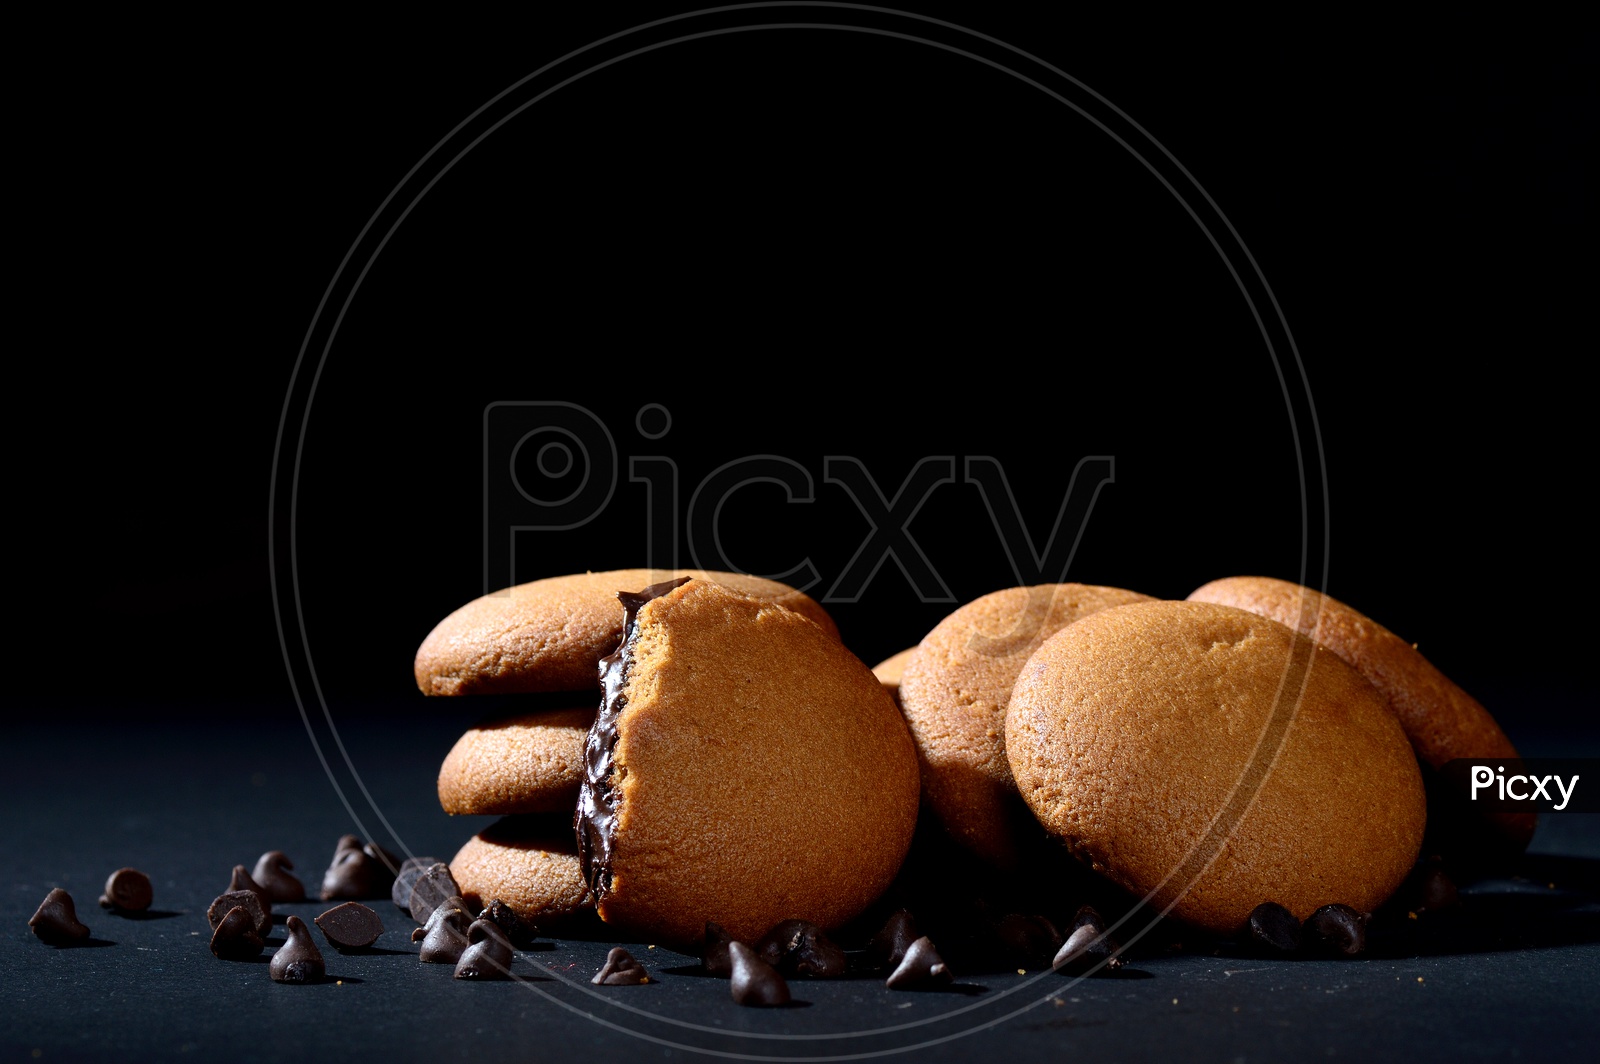 Biscuits filled with chocolate cream. Chocolate cream cookies. brown chocolate biscuits with cream filling on black background.